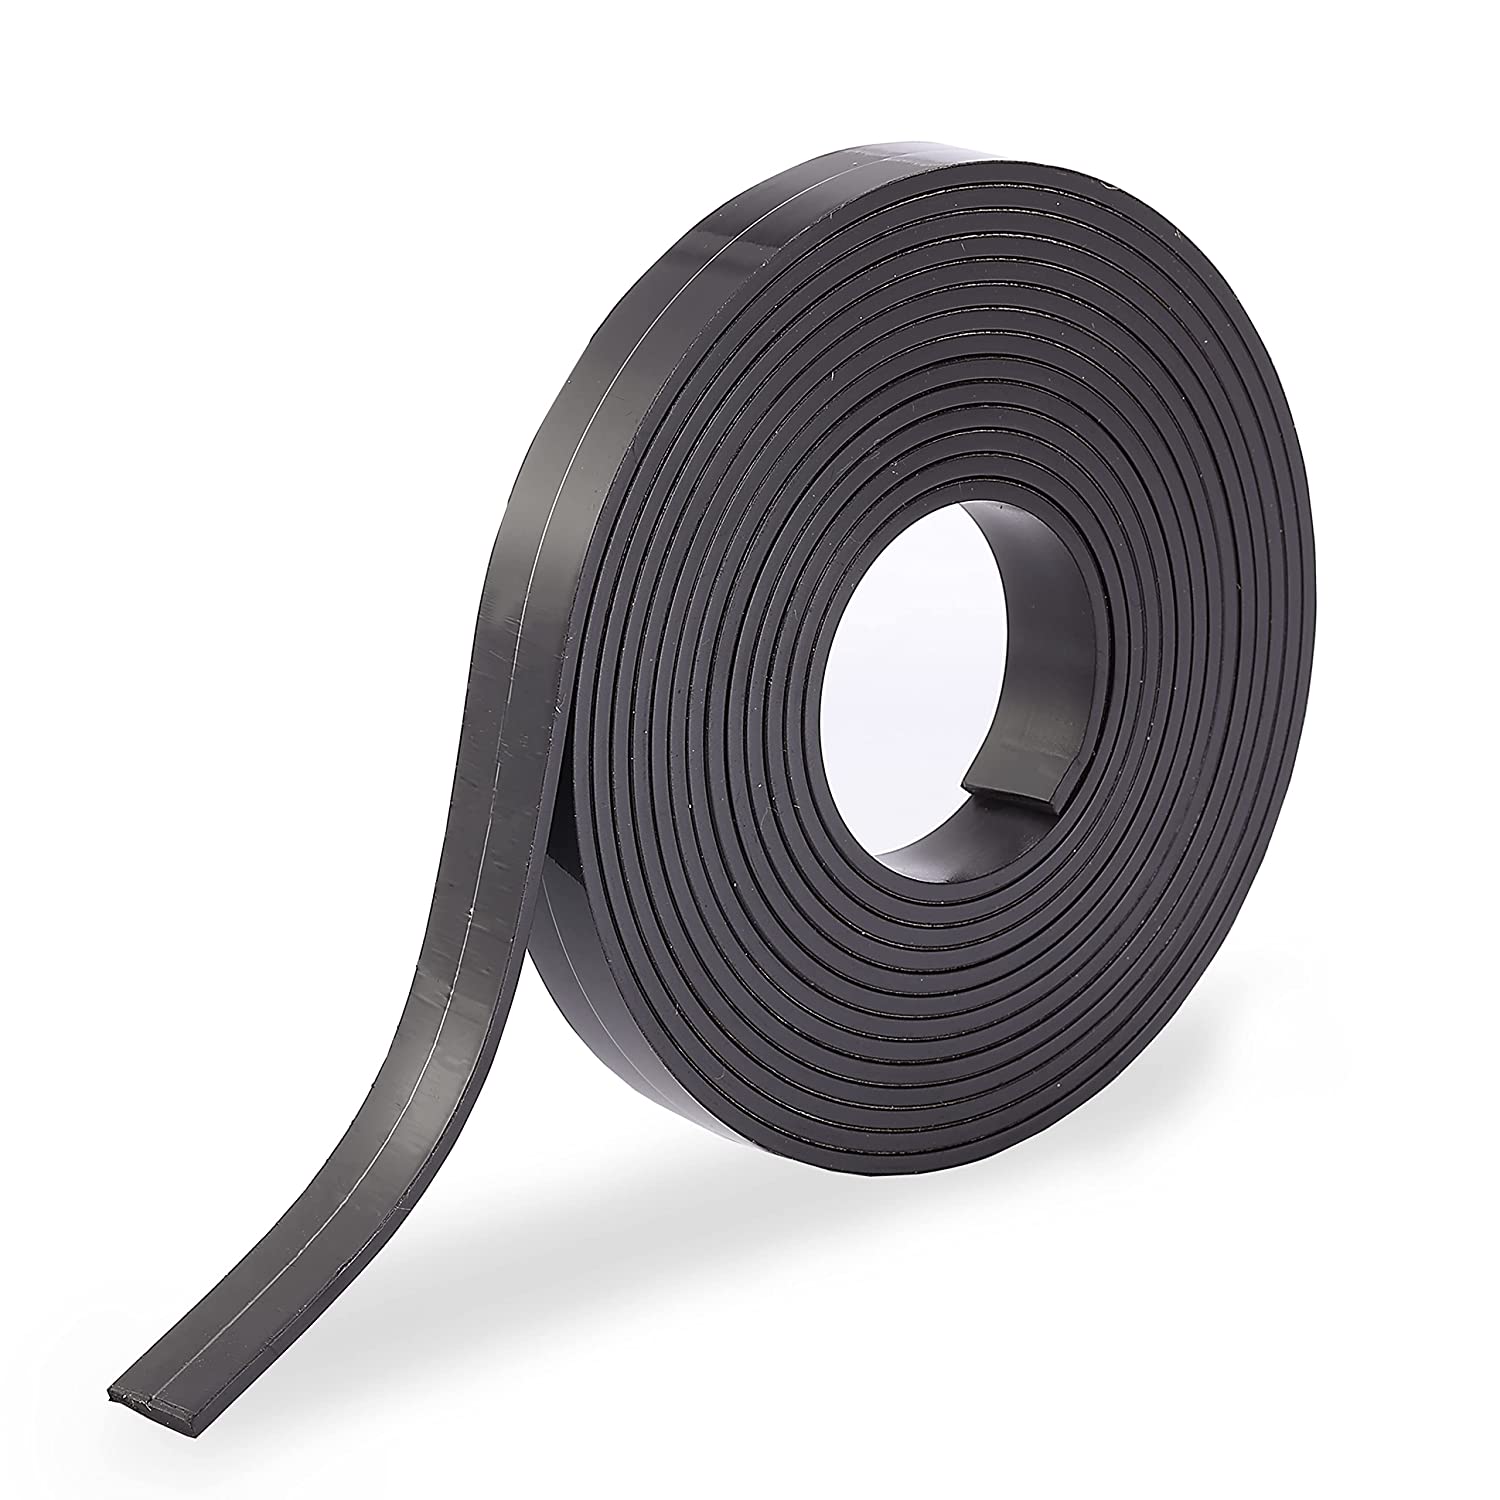 Mr. Pen- Flexible Magnetic Tape, 1/2 Inch x 10 Feet, Magnetic Strip,  Magnets with Adhesive Backing